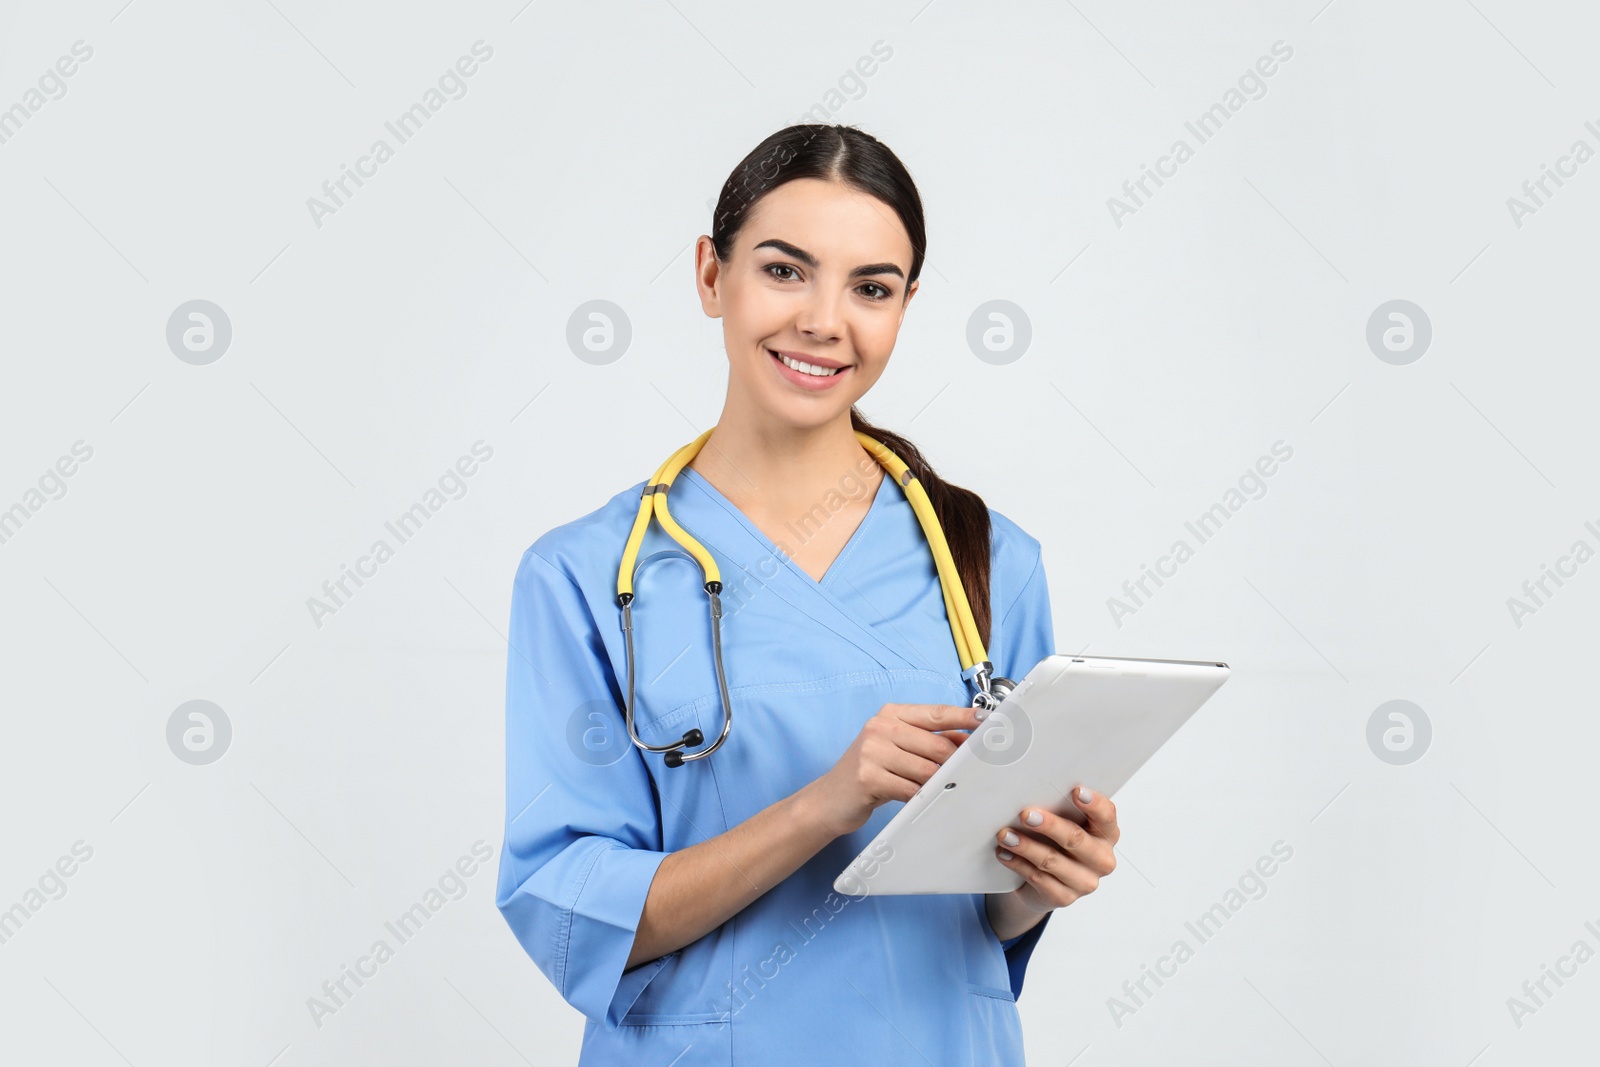 Photo of Portrait of medical assistant with stethoscope and tablet on light background